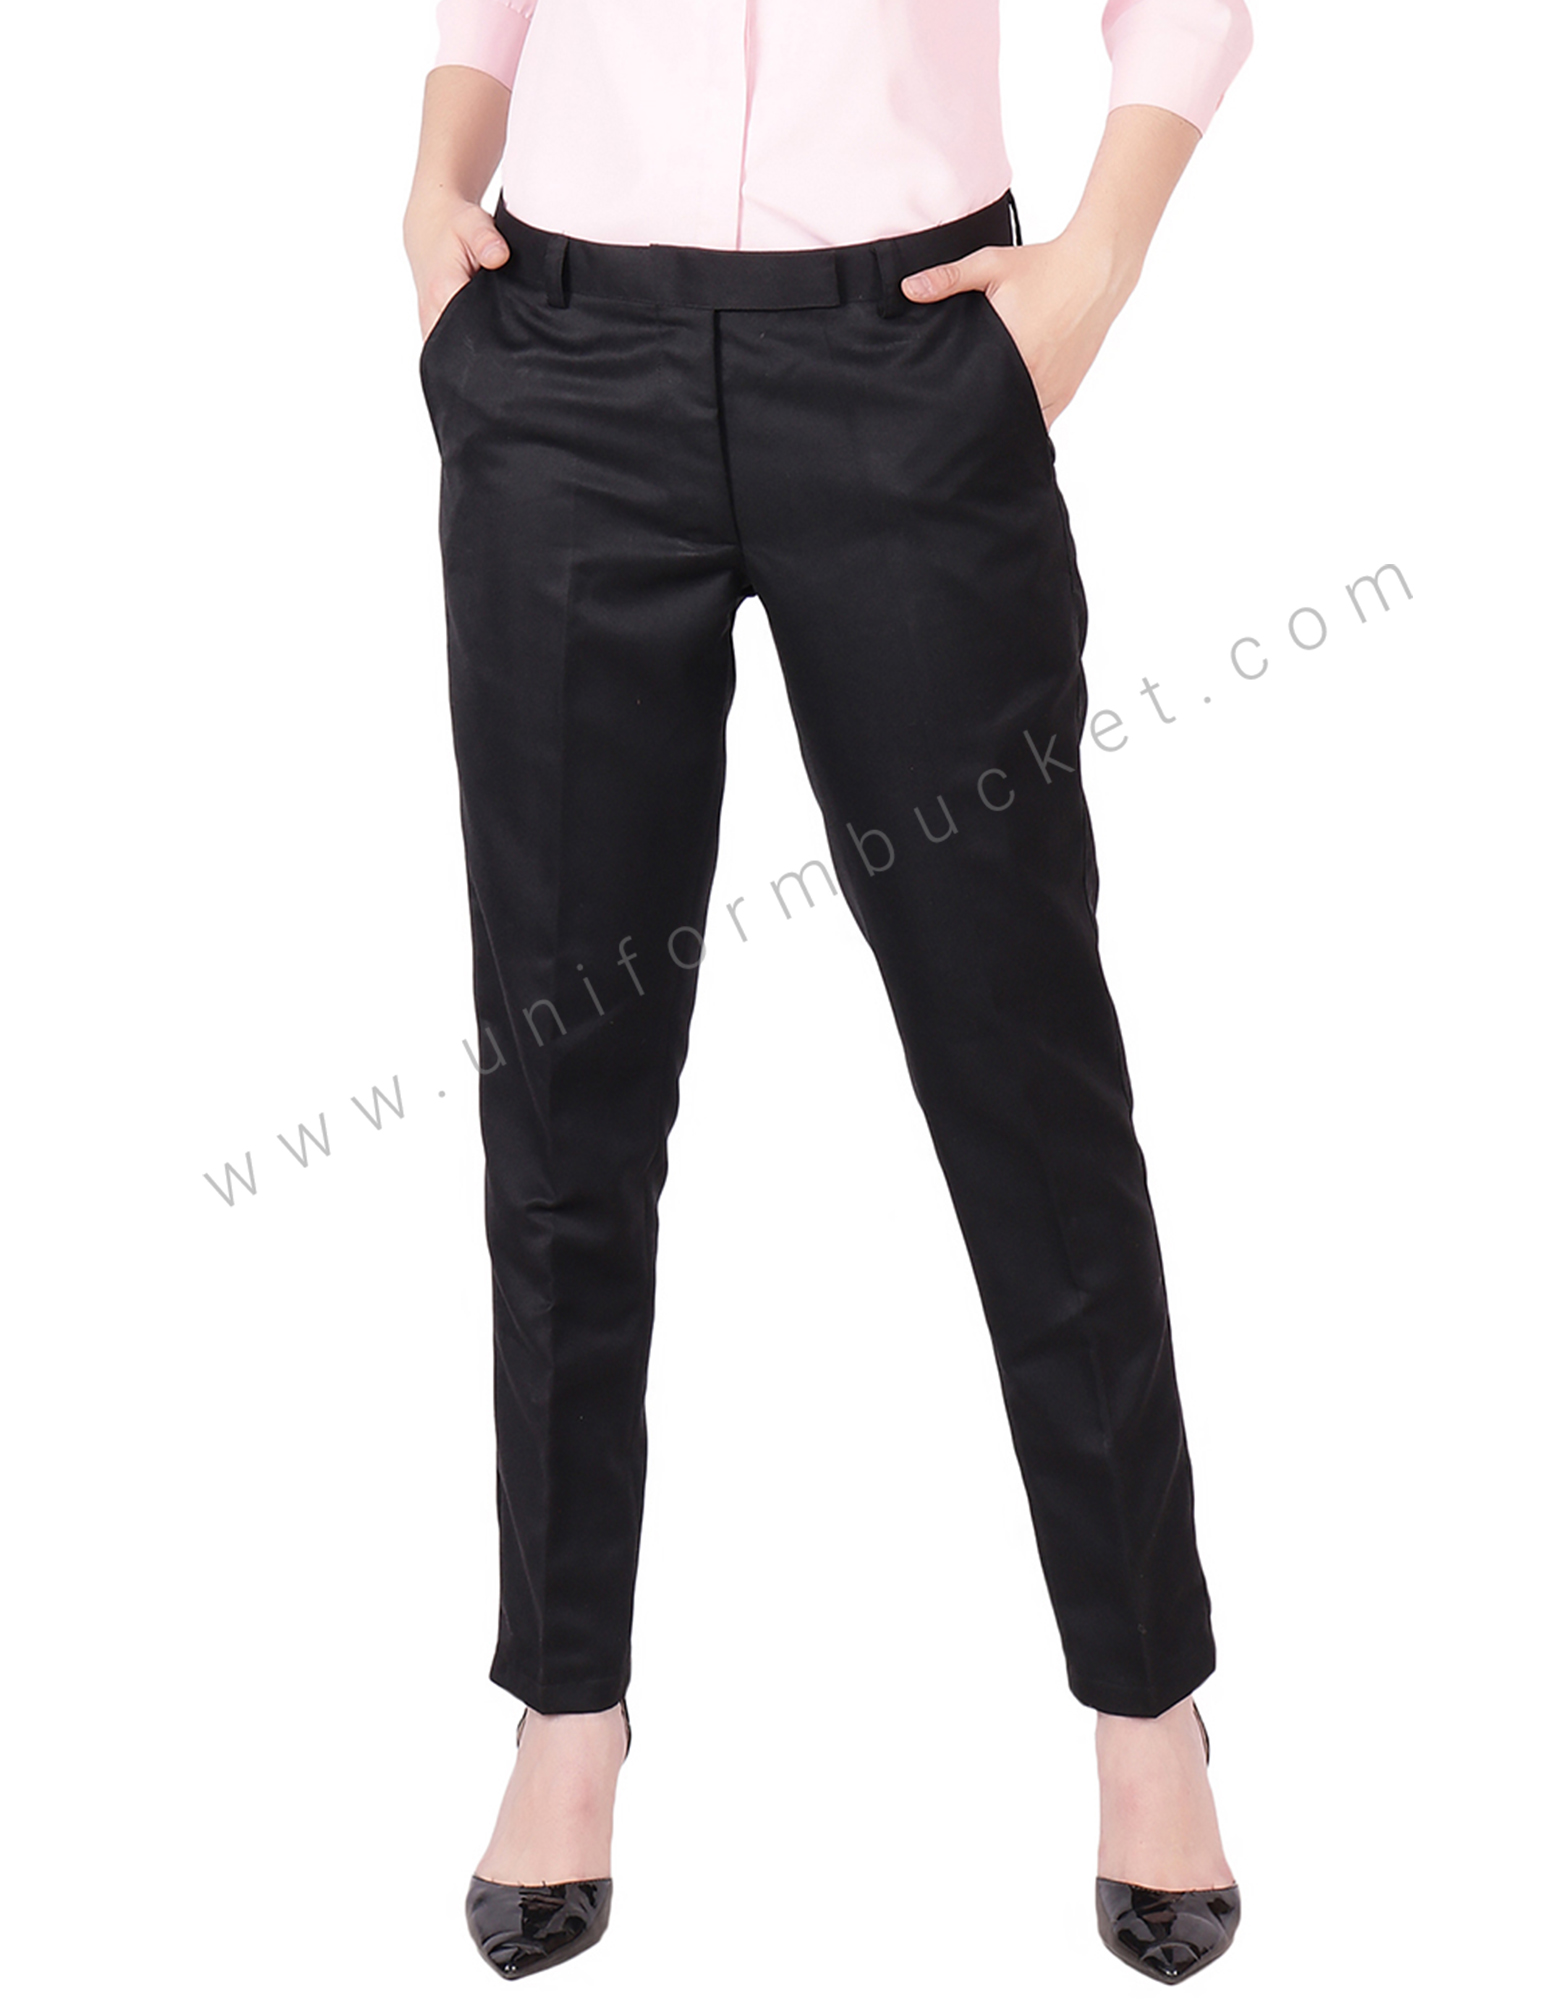 Details more than 128 black formal trousers womens latest